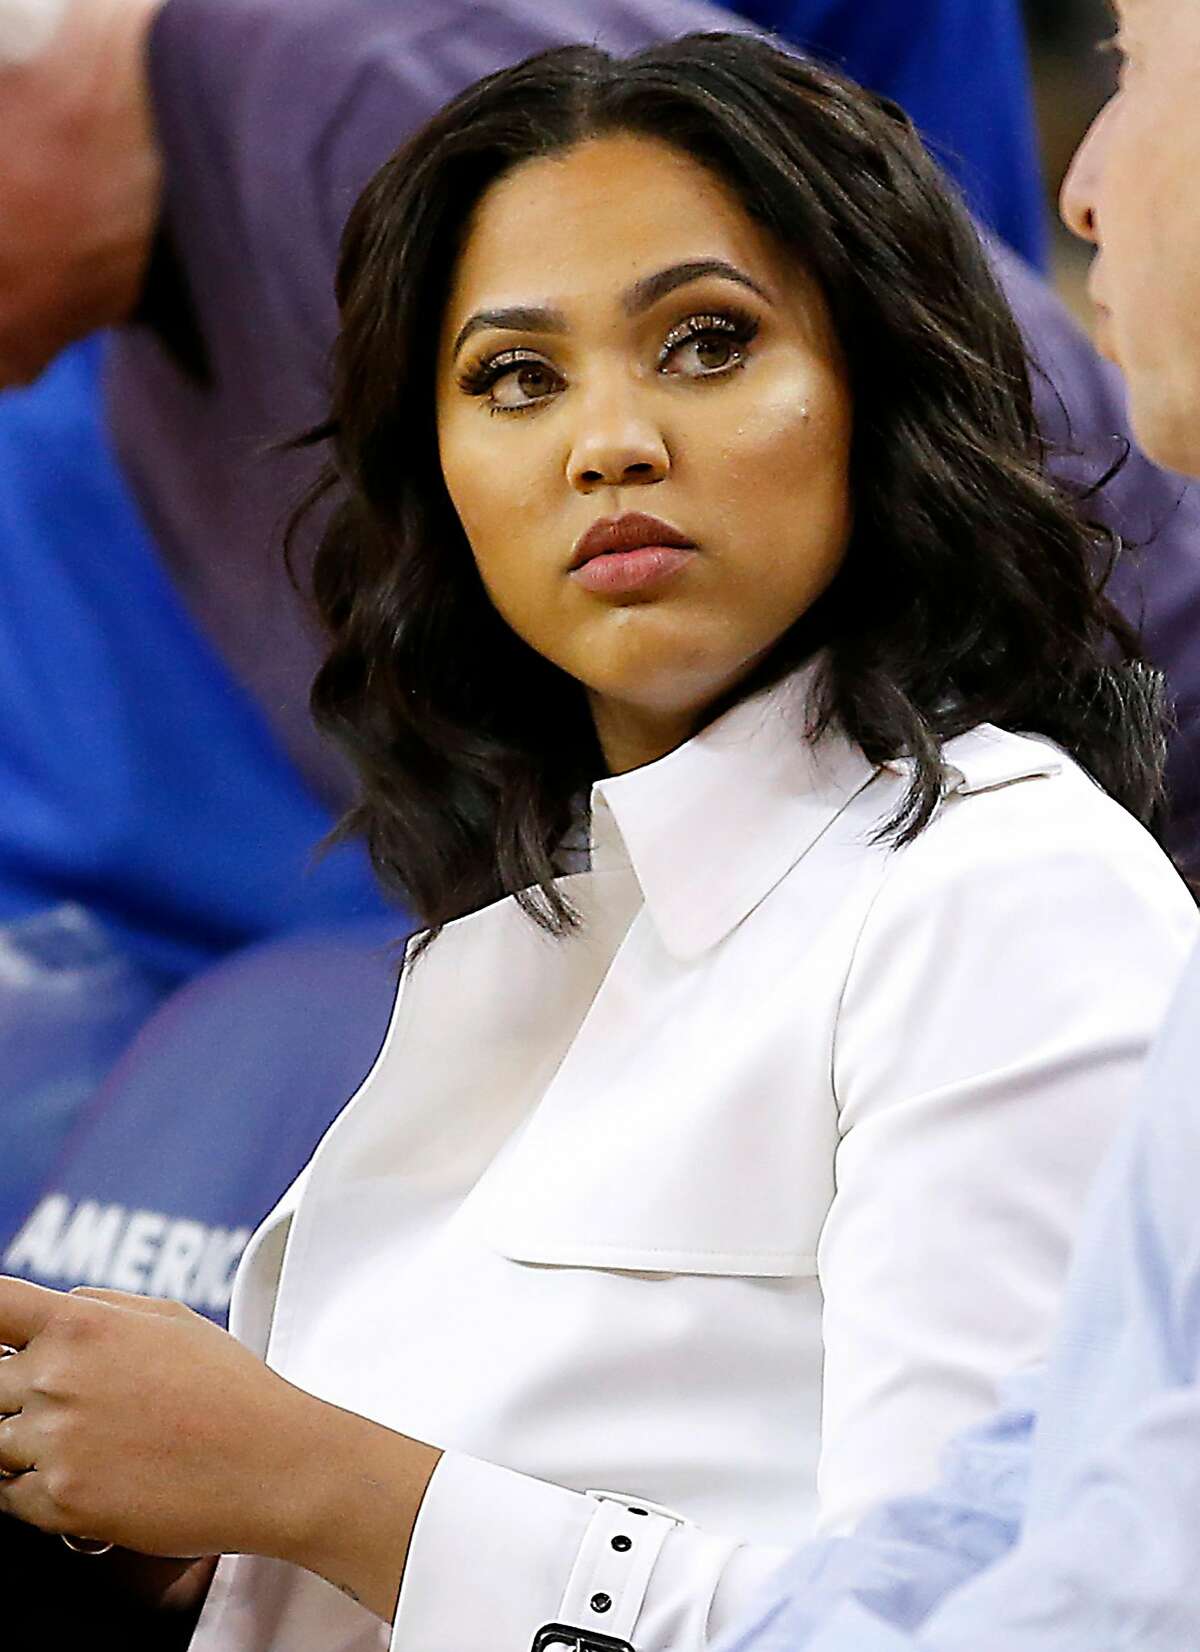 Ayesha Curry went off on the NBA in a postgame tweet Thursday, saying it rigged Game 6 of the Finals after the Warriors lost. Click through the gallery to relive the other times athletes' wives generated headlines.